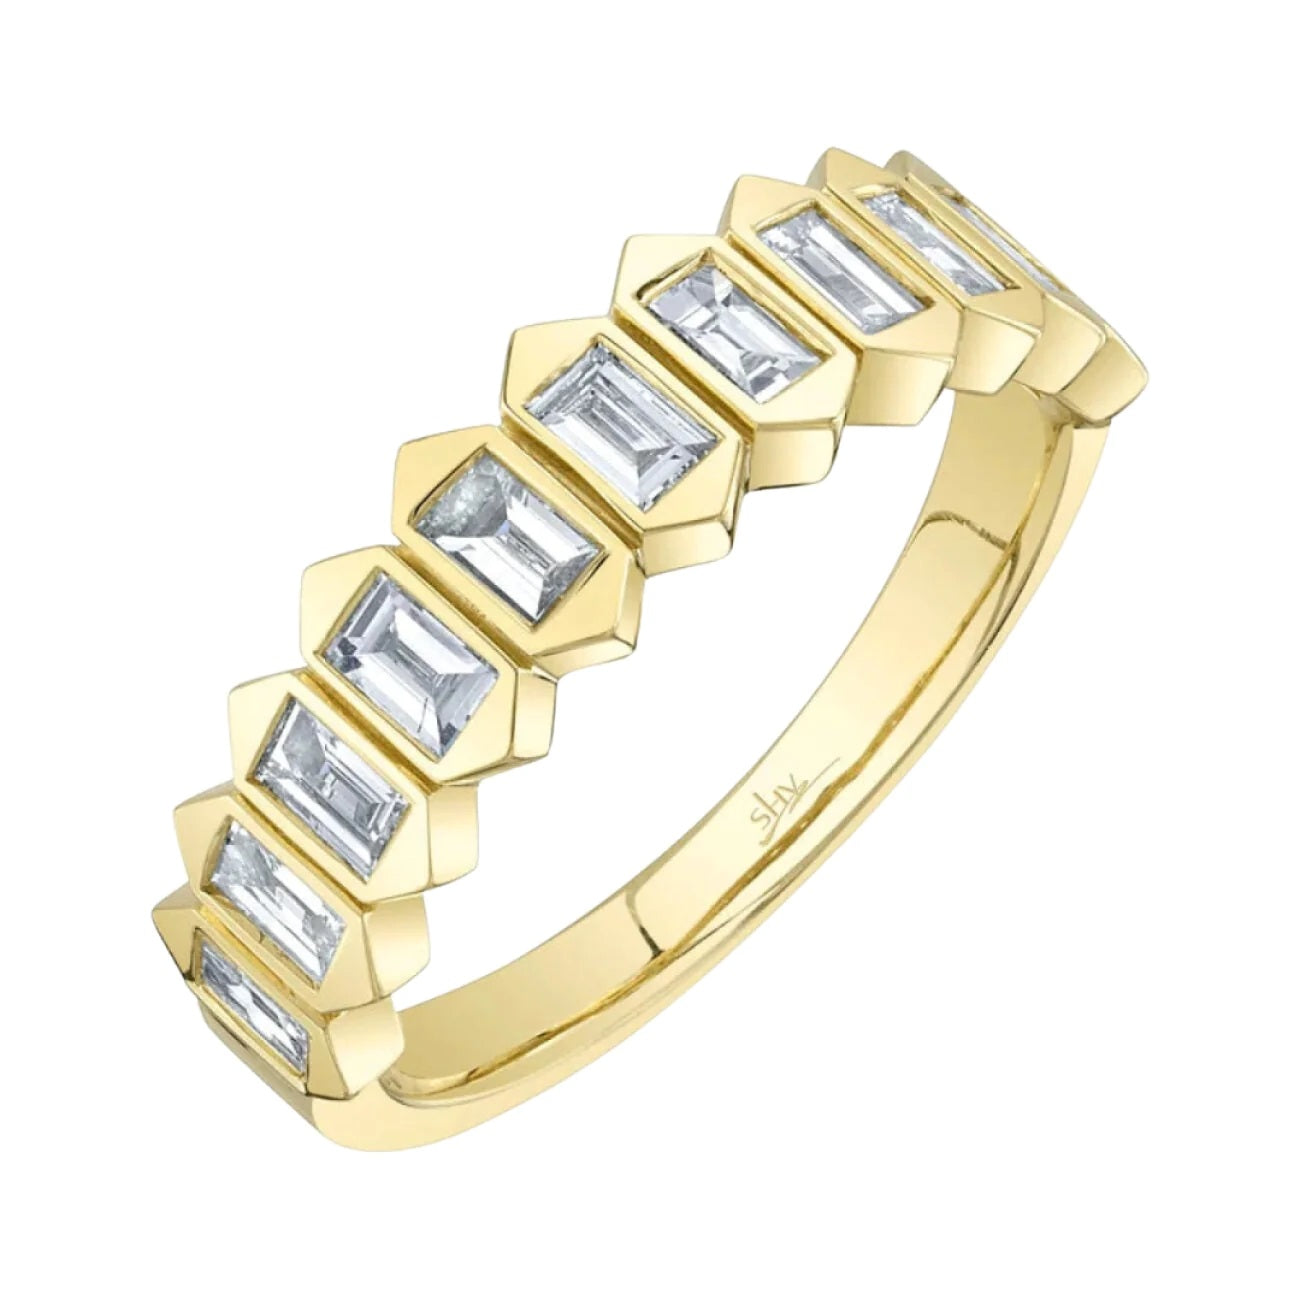 14K YELLOW GOLD BAGUETTE RING .75CT